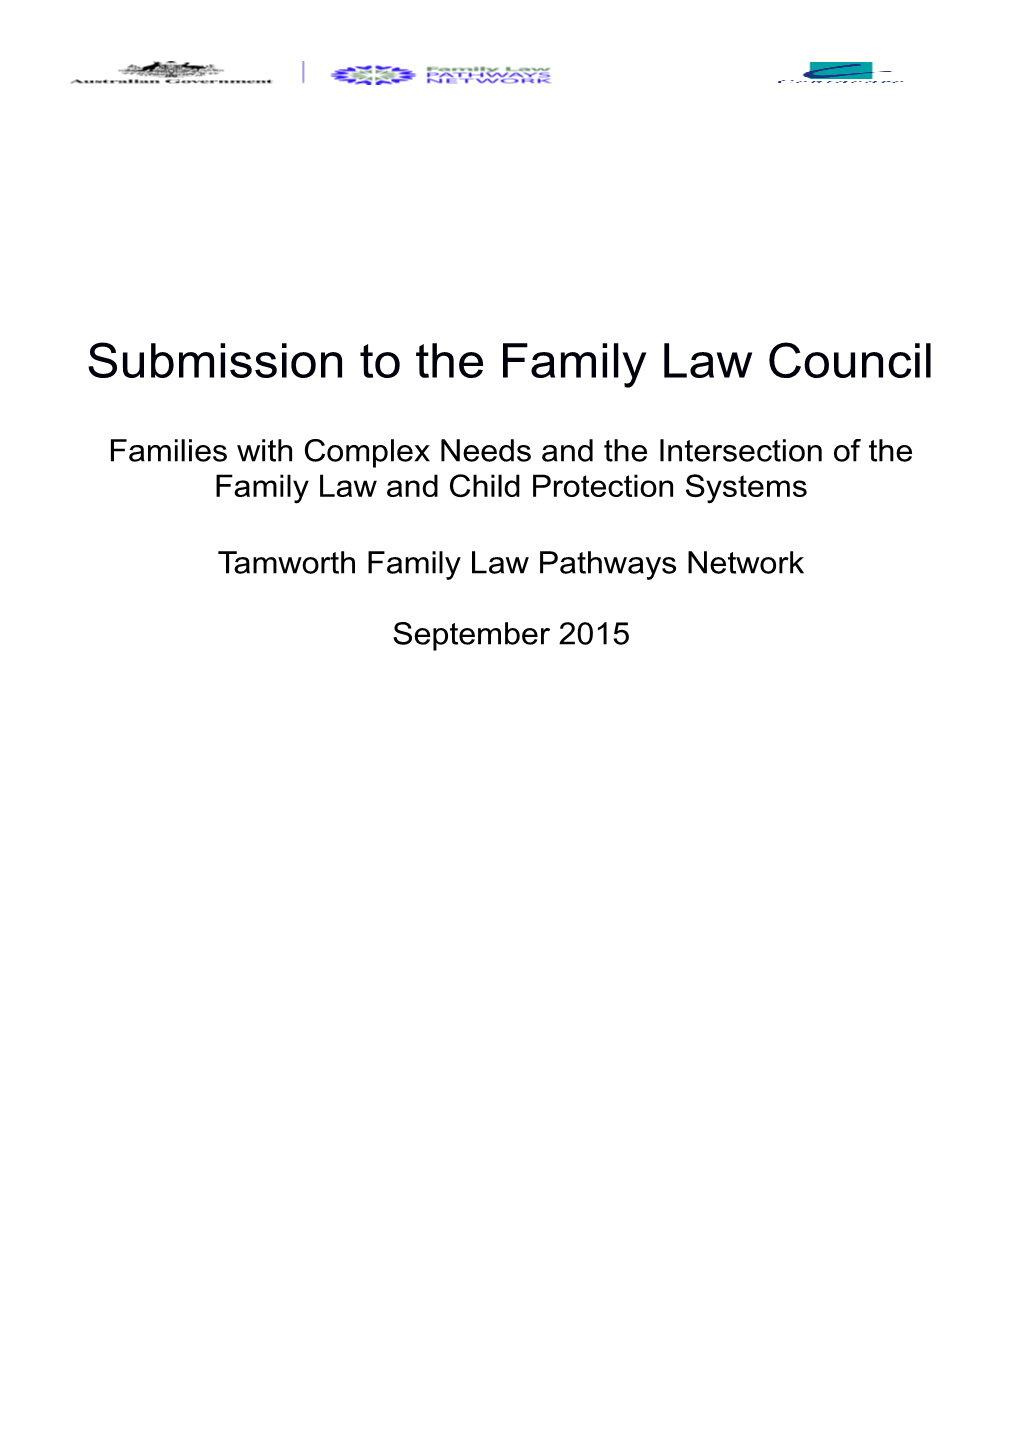 Centacare NENW and Tamworth Family Law Pathways Network